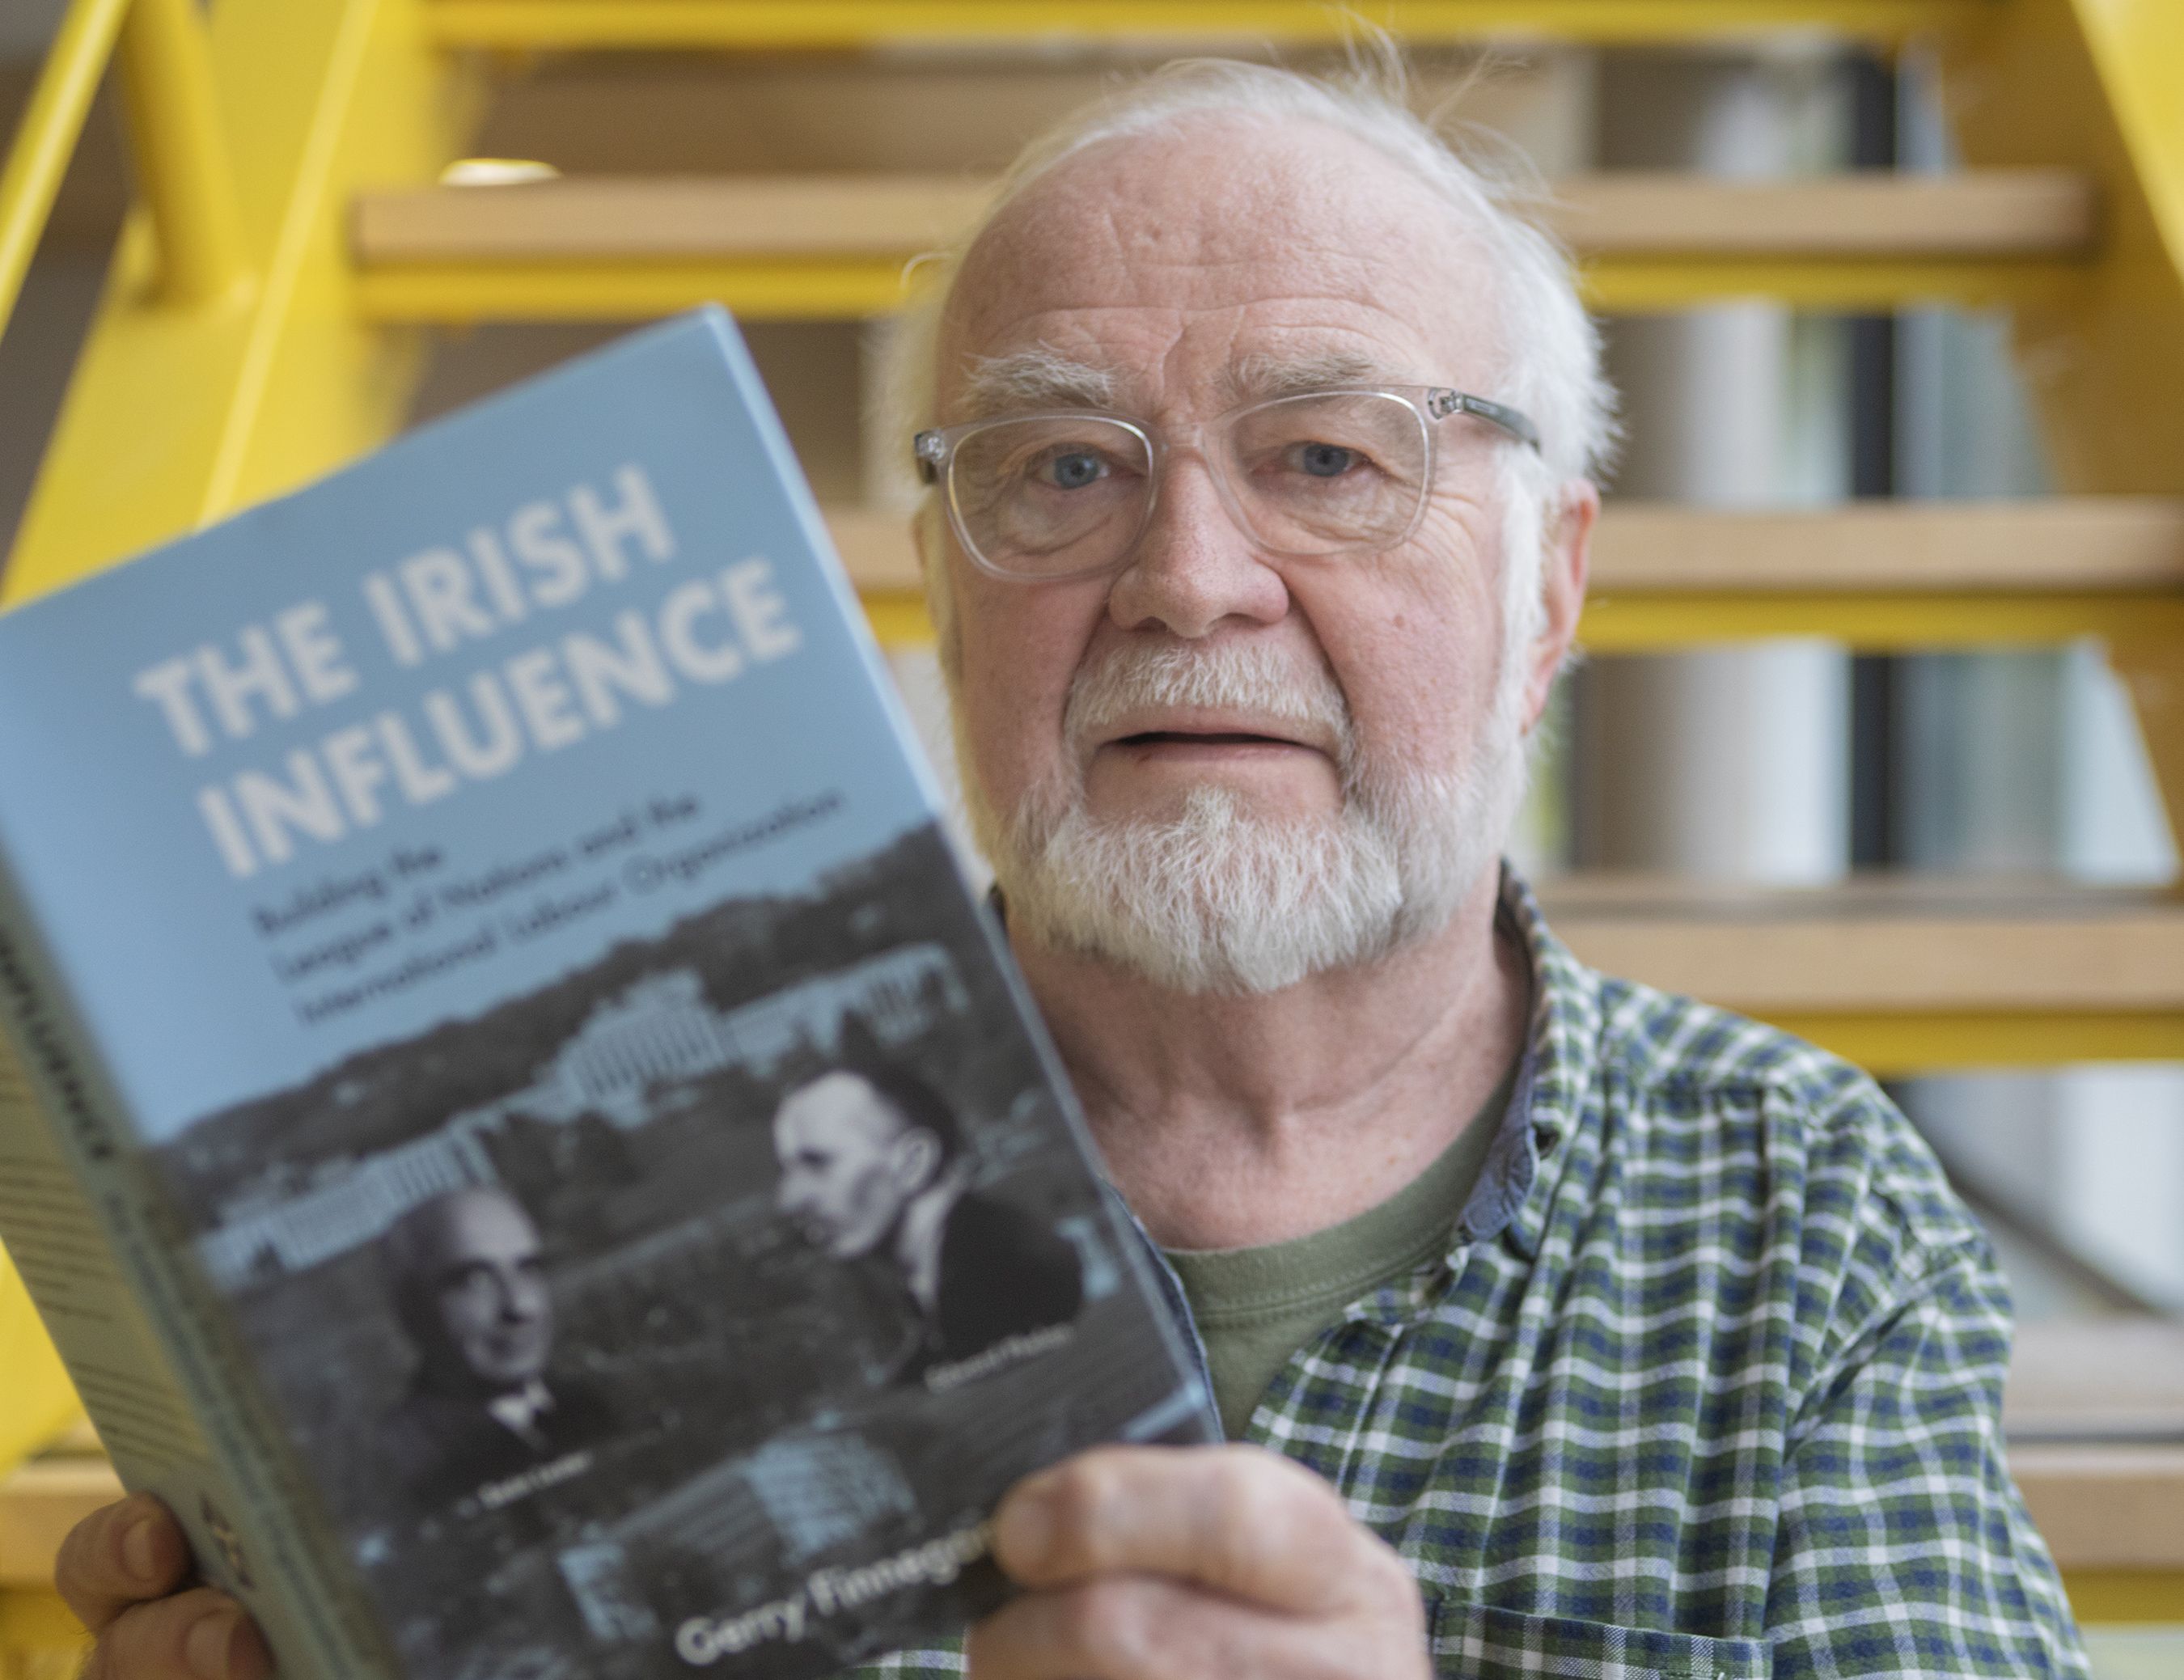 BOOK: Gerry Finnegan explores the lives of two Irish global leaders, Seán Lester and Edward Phelan in his new book